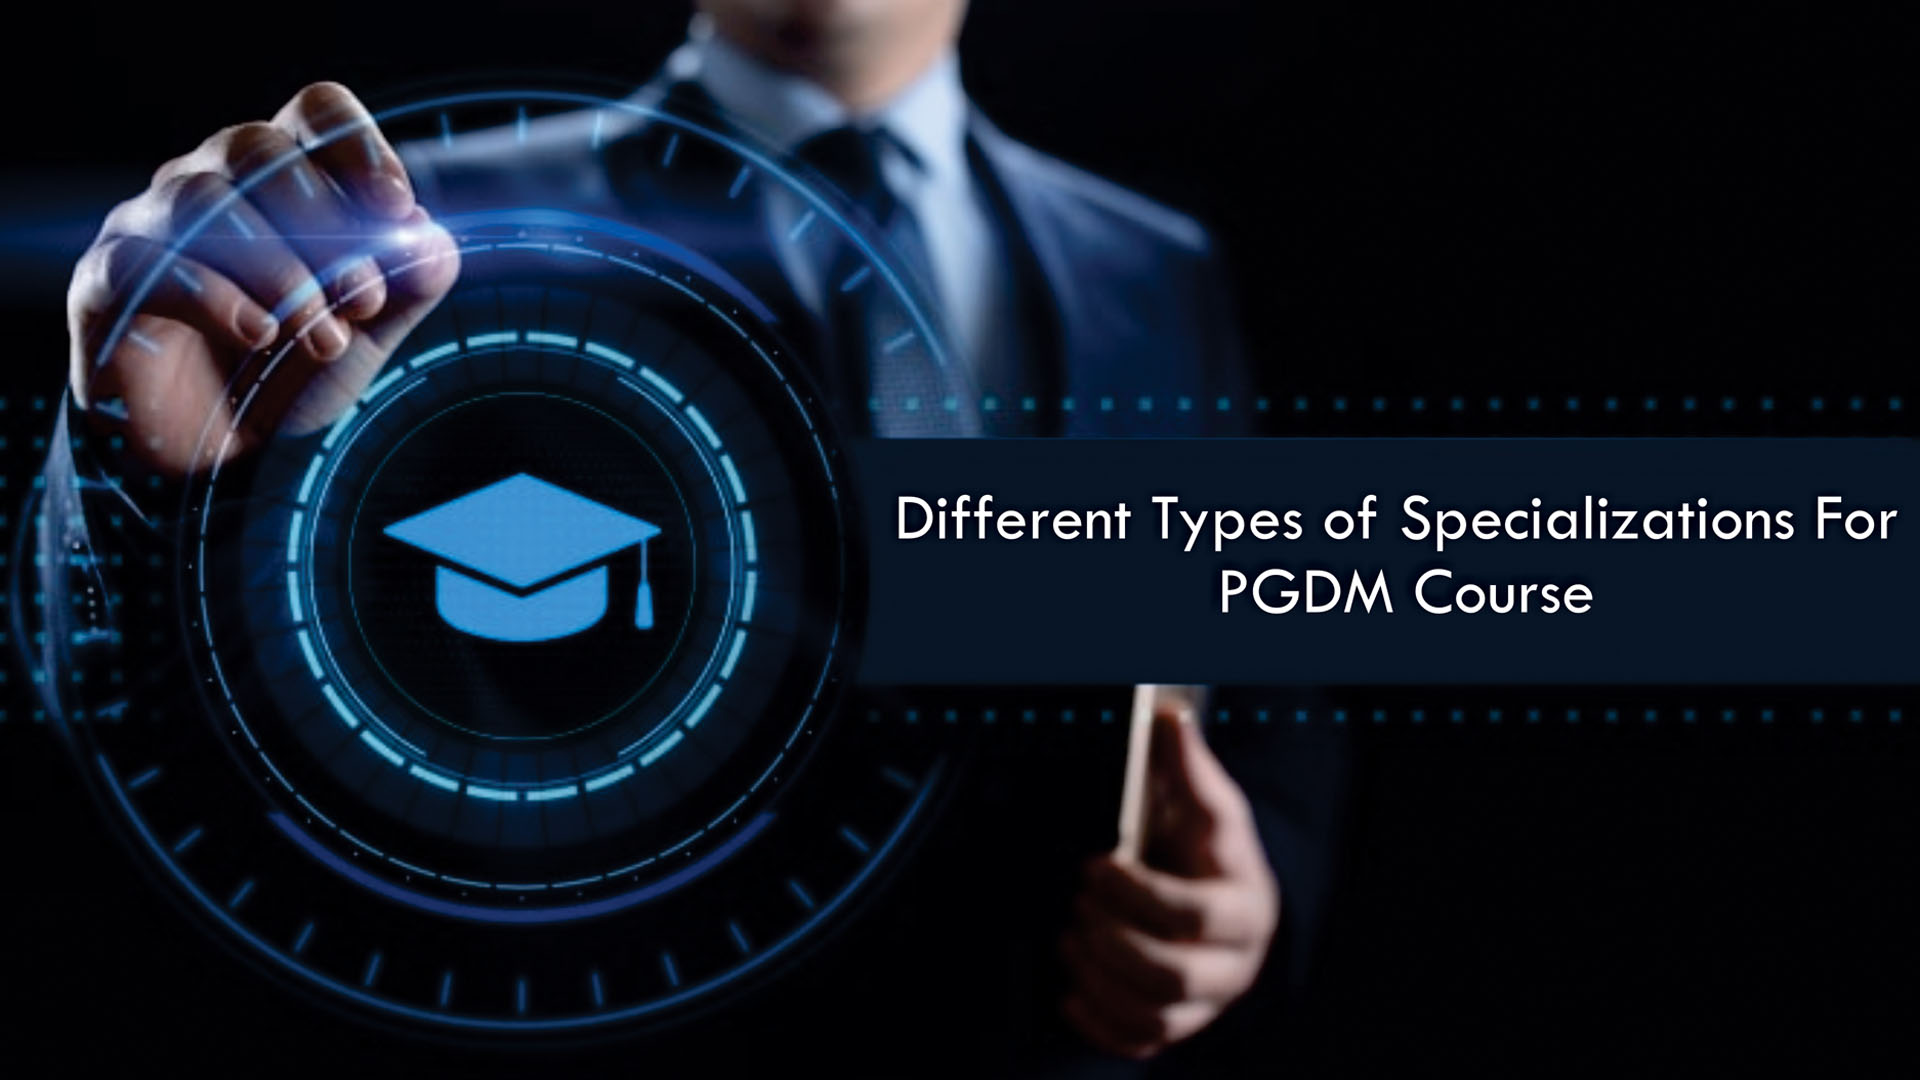 Different type of Specializations for PGDM
                        course